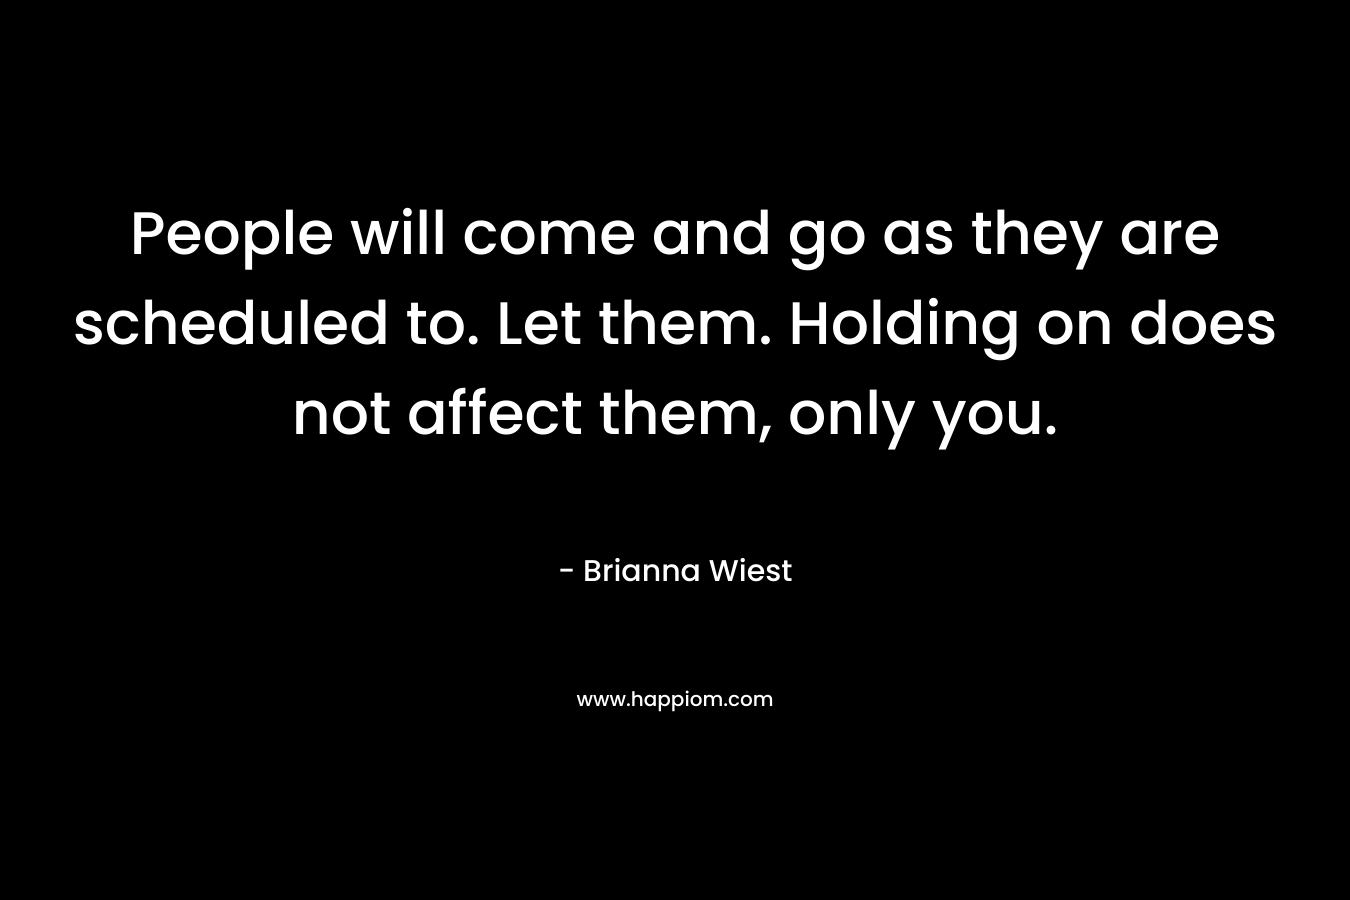 People will come and go as they are scheduled to. Let them. Holding on does not affect them, only you.